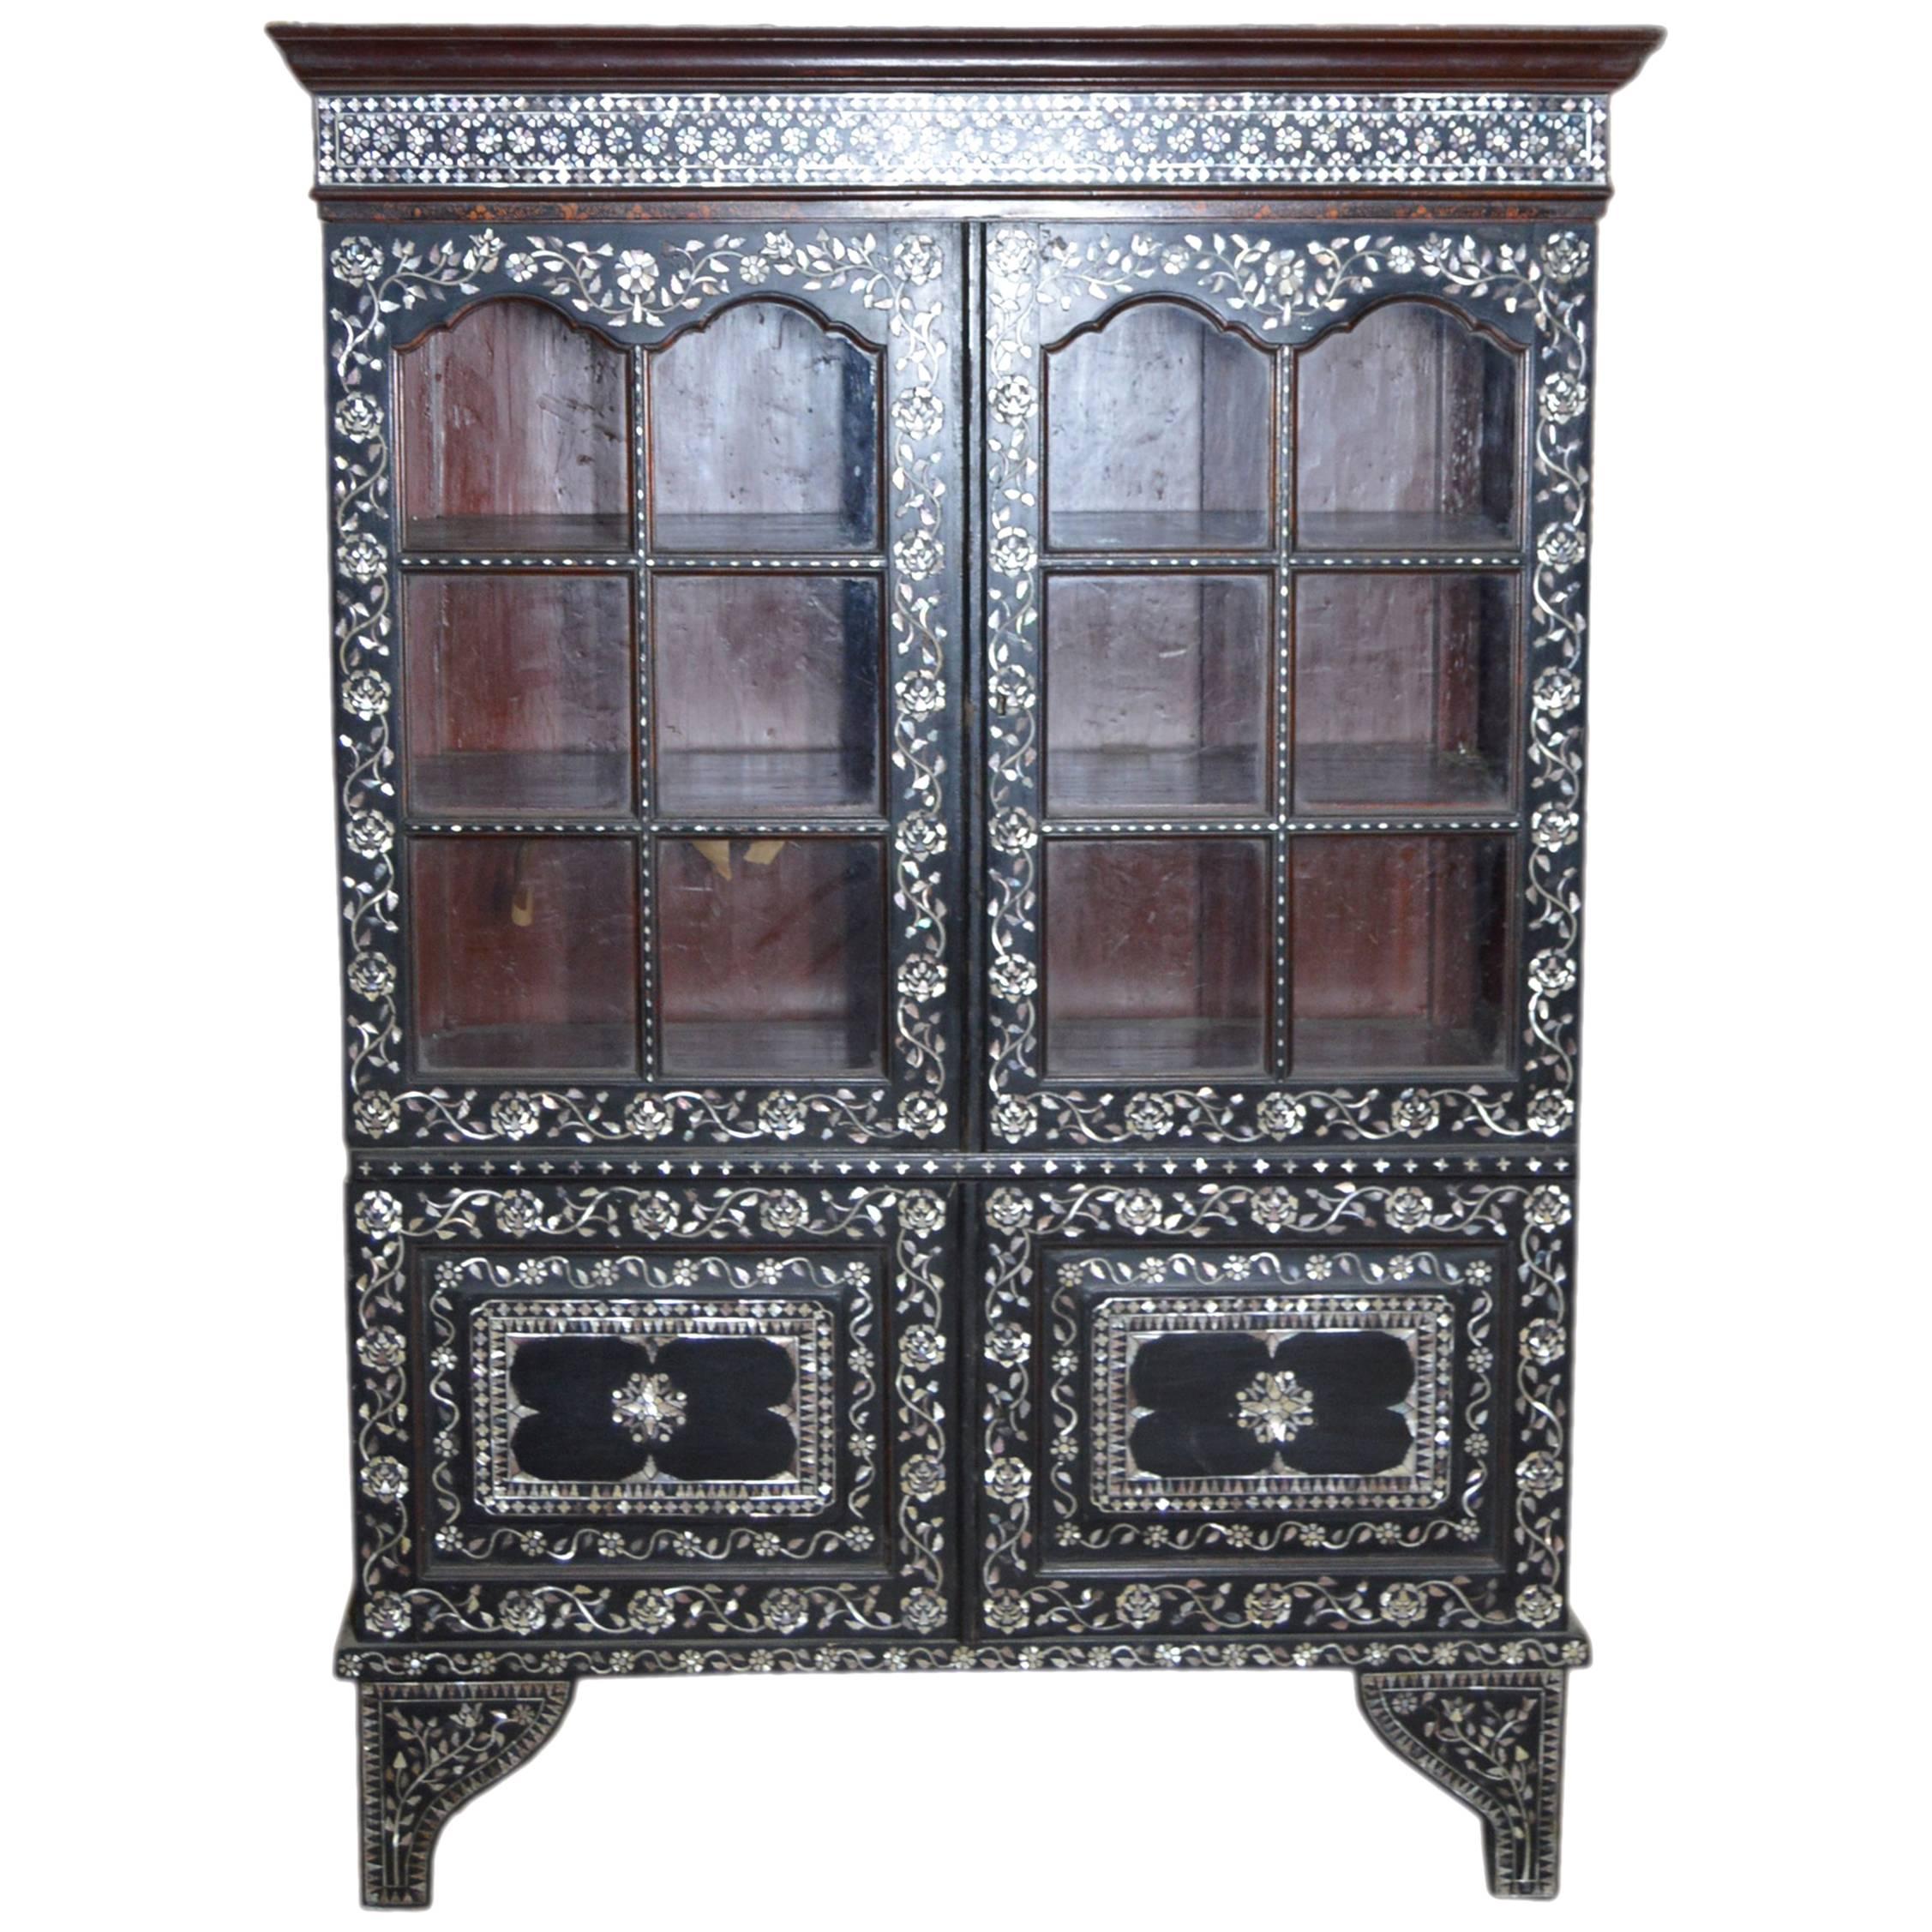 19th Century Indian Ebonized Wood Cabinet with Mother-of-Pearl Inlay and Glass